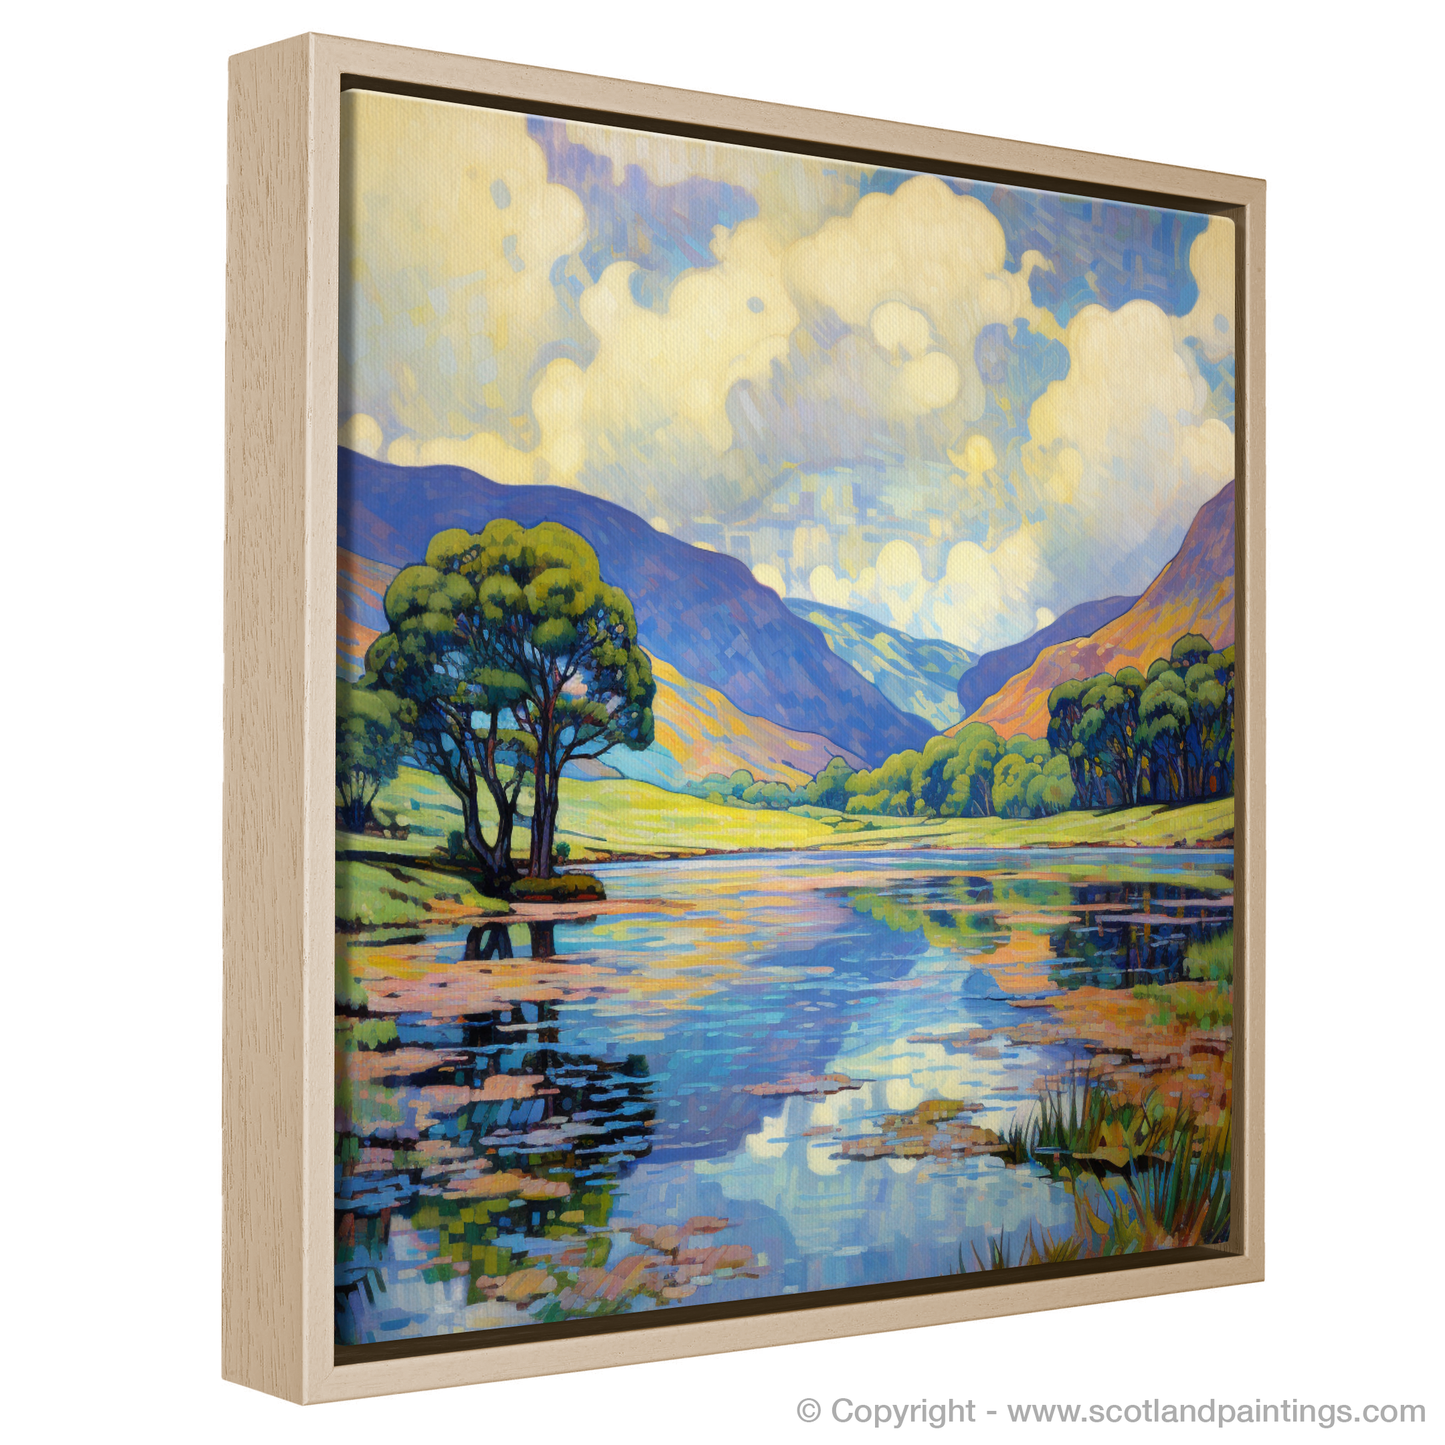 Painting and Art Print of Glen Lochay, Perthshire in summer entitled "Summer Serenade in Glen Lochay - An Impressionist Ode to Perthshire's Beauty".